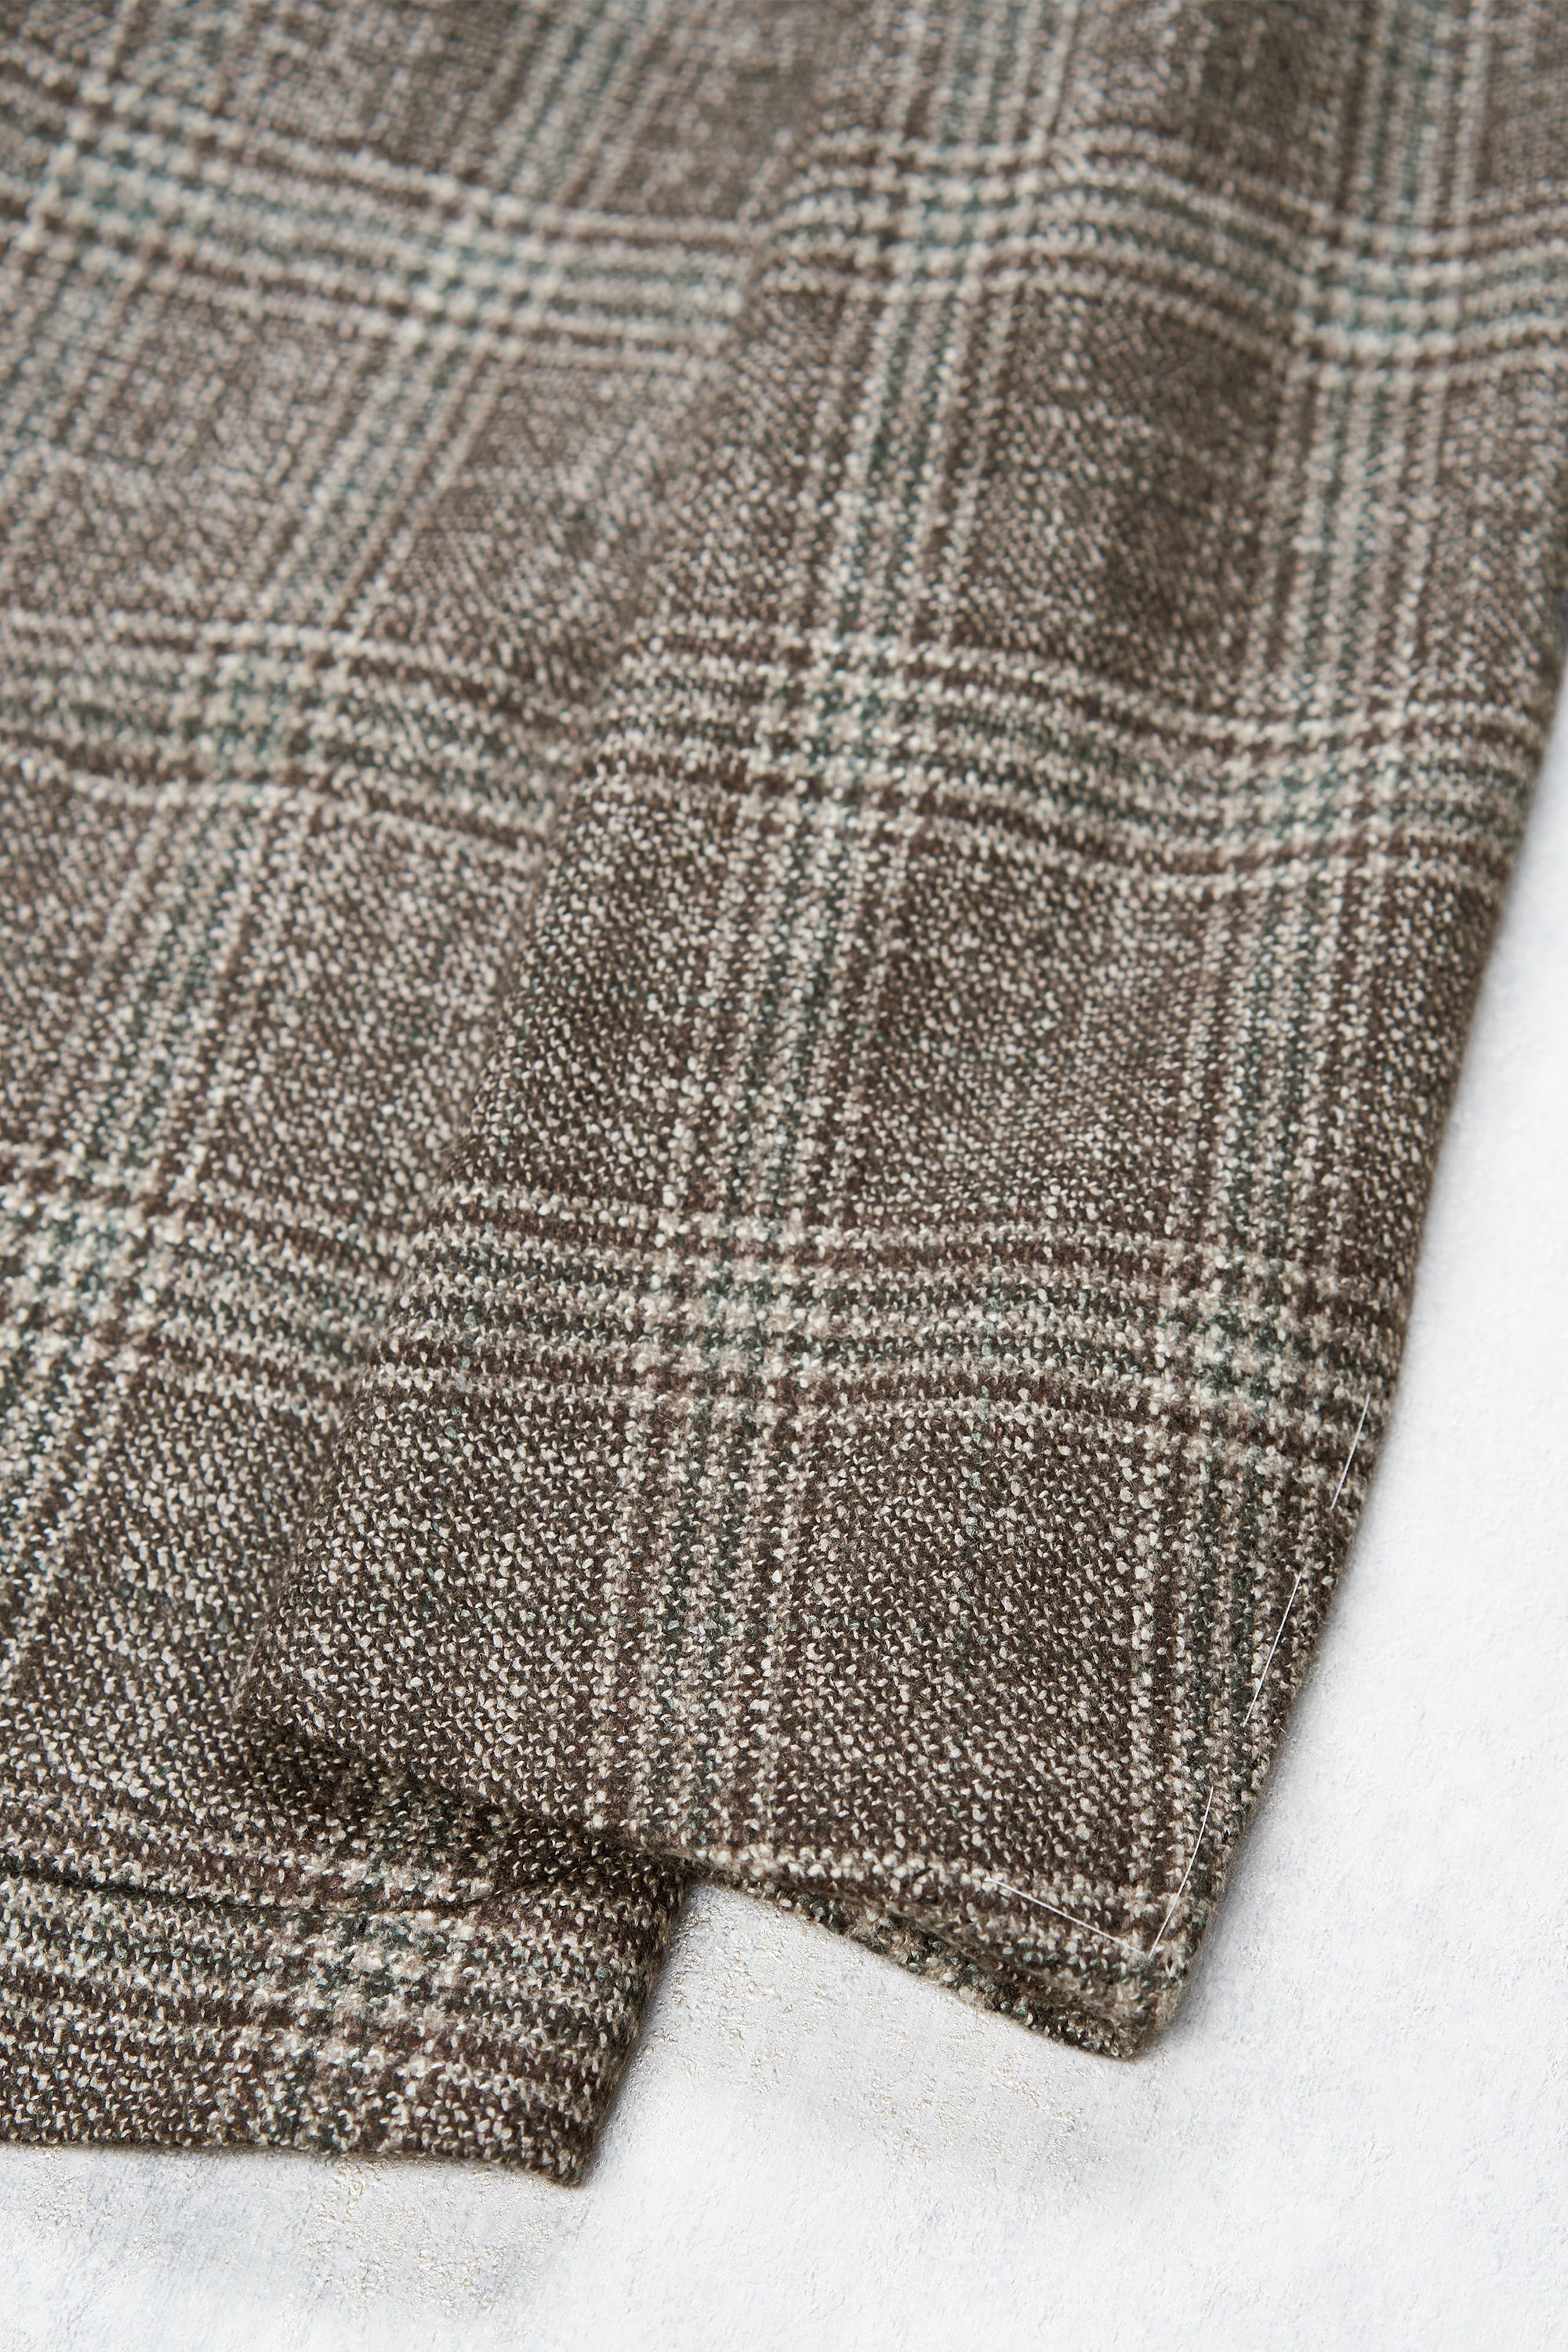 Cesare Attolini Brown with Green Check Wool/Silk Sport Coat